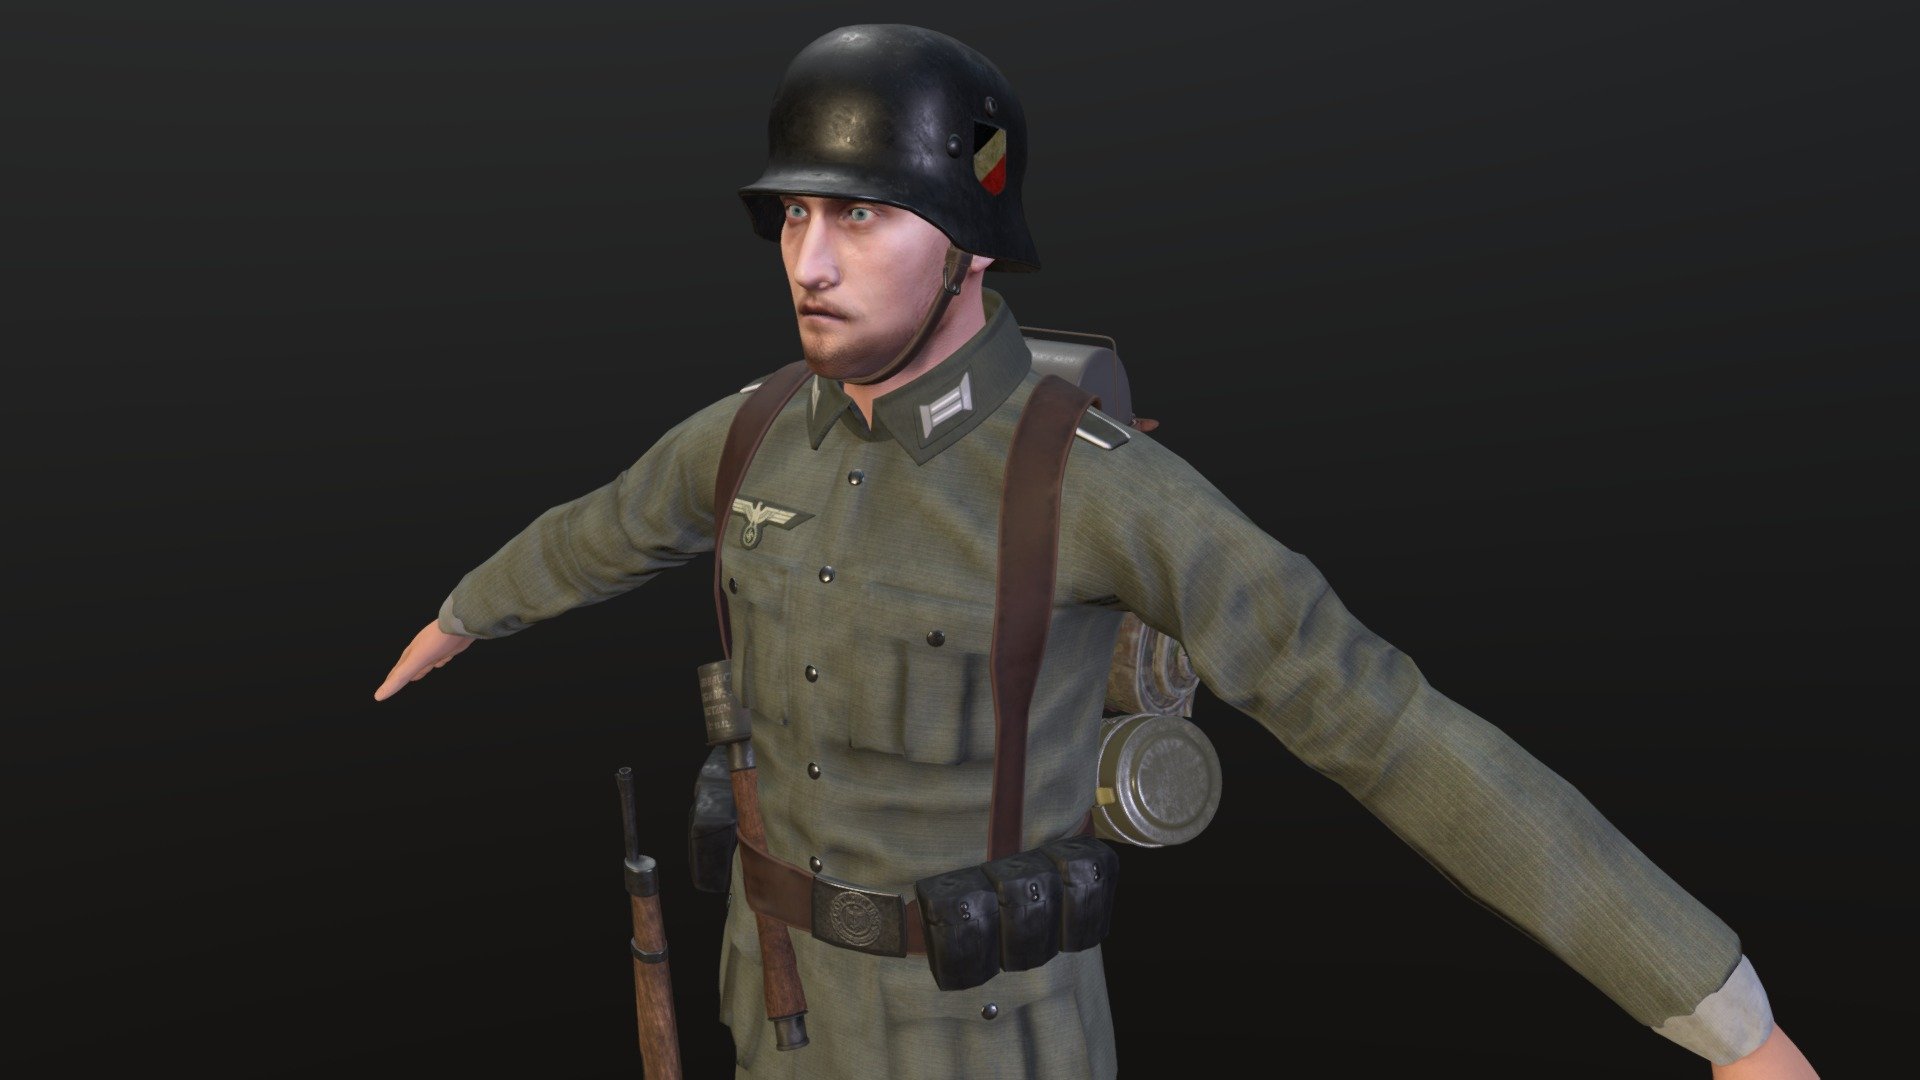 Wehrmacht Infantry Soldier from WW2

I decided to release all my Wehrmacht equipment items as one cheaper pack with the soldier character.

He is equipped with: 

1. Kar98K rifle

2. Y straps

3. helmet

4. mess kit

5. bread bag

6. gas mask

7. sleep mat.

Equipment can be found in my other items.



all listed equpment is attached as separate files for your use

Soldier is mostly low poly and with possibility to reconfigure his loadout or if wanted and exchange parts like head for different one.

It's not rigged

The Soldier has many different textures and maps so it should be possible to tune him into any PBR game engine - Wehrmacht Infantry soldier - Buy Royalty Free 3D model by mahrcheen 3d model